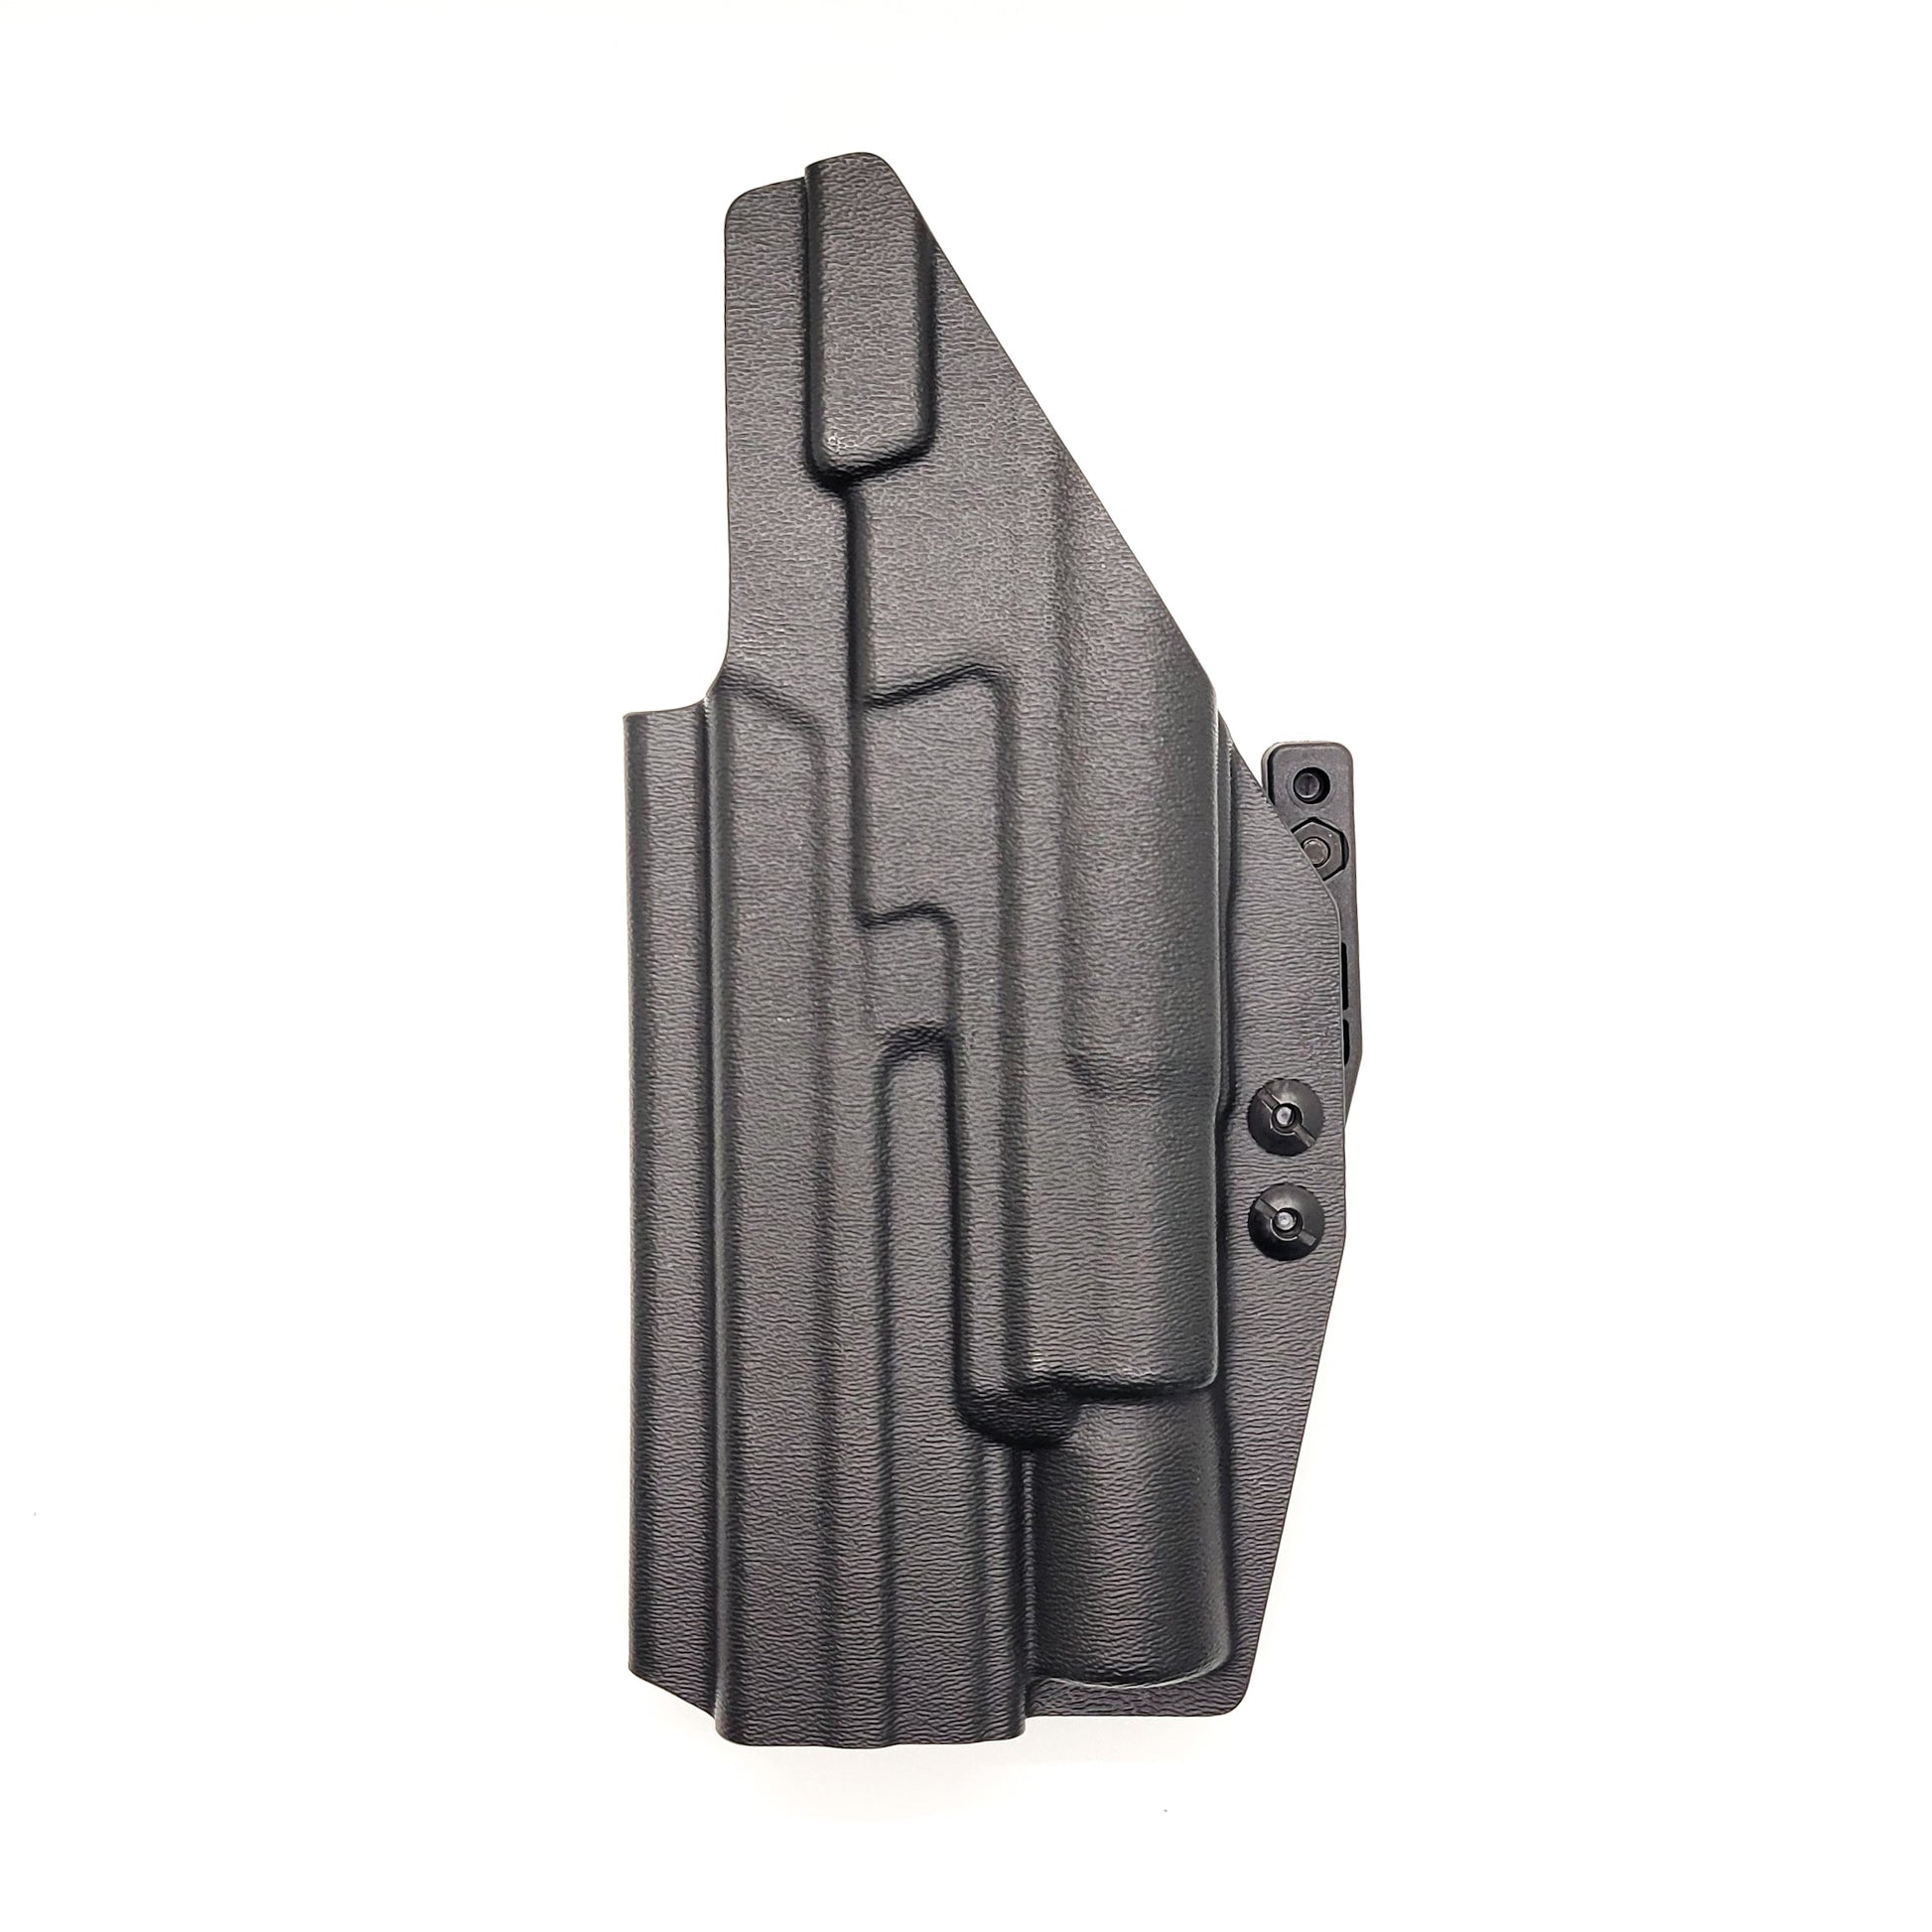 For the best Inside Waistband IWB AIWB Holster designed to fit the Smith and Wesson 2023 SPEC Series M&P 9 Metal M2.0 & Surefire X300U-A, X300U-B, X-300T-A, or X-300T-B weapon light, shop Four Brothers holsters.  Full sweat guard, adjustable retention, cleared for a red dot sight. Made in the USA. 4BROS 4Brothers Holster